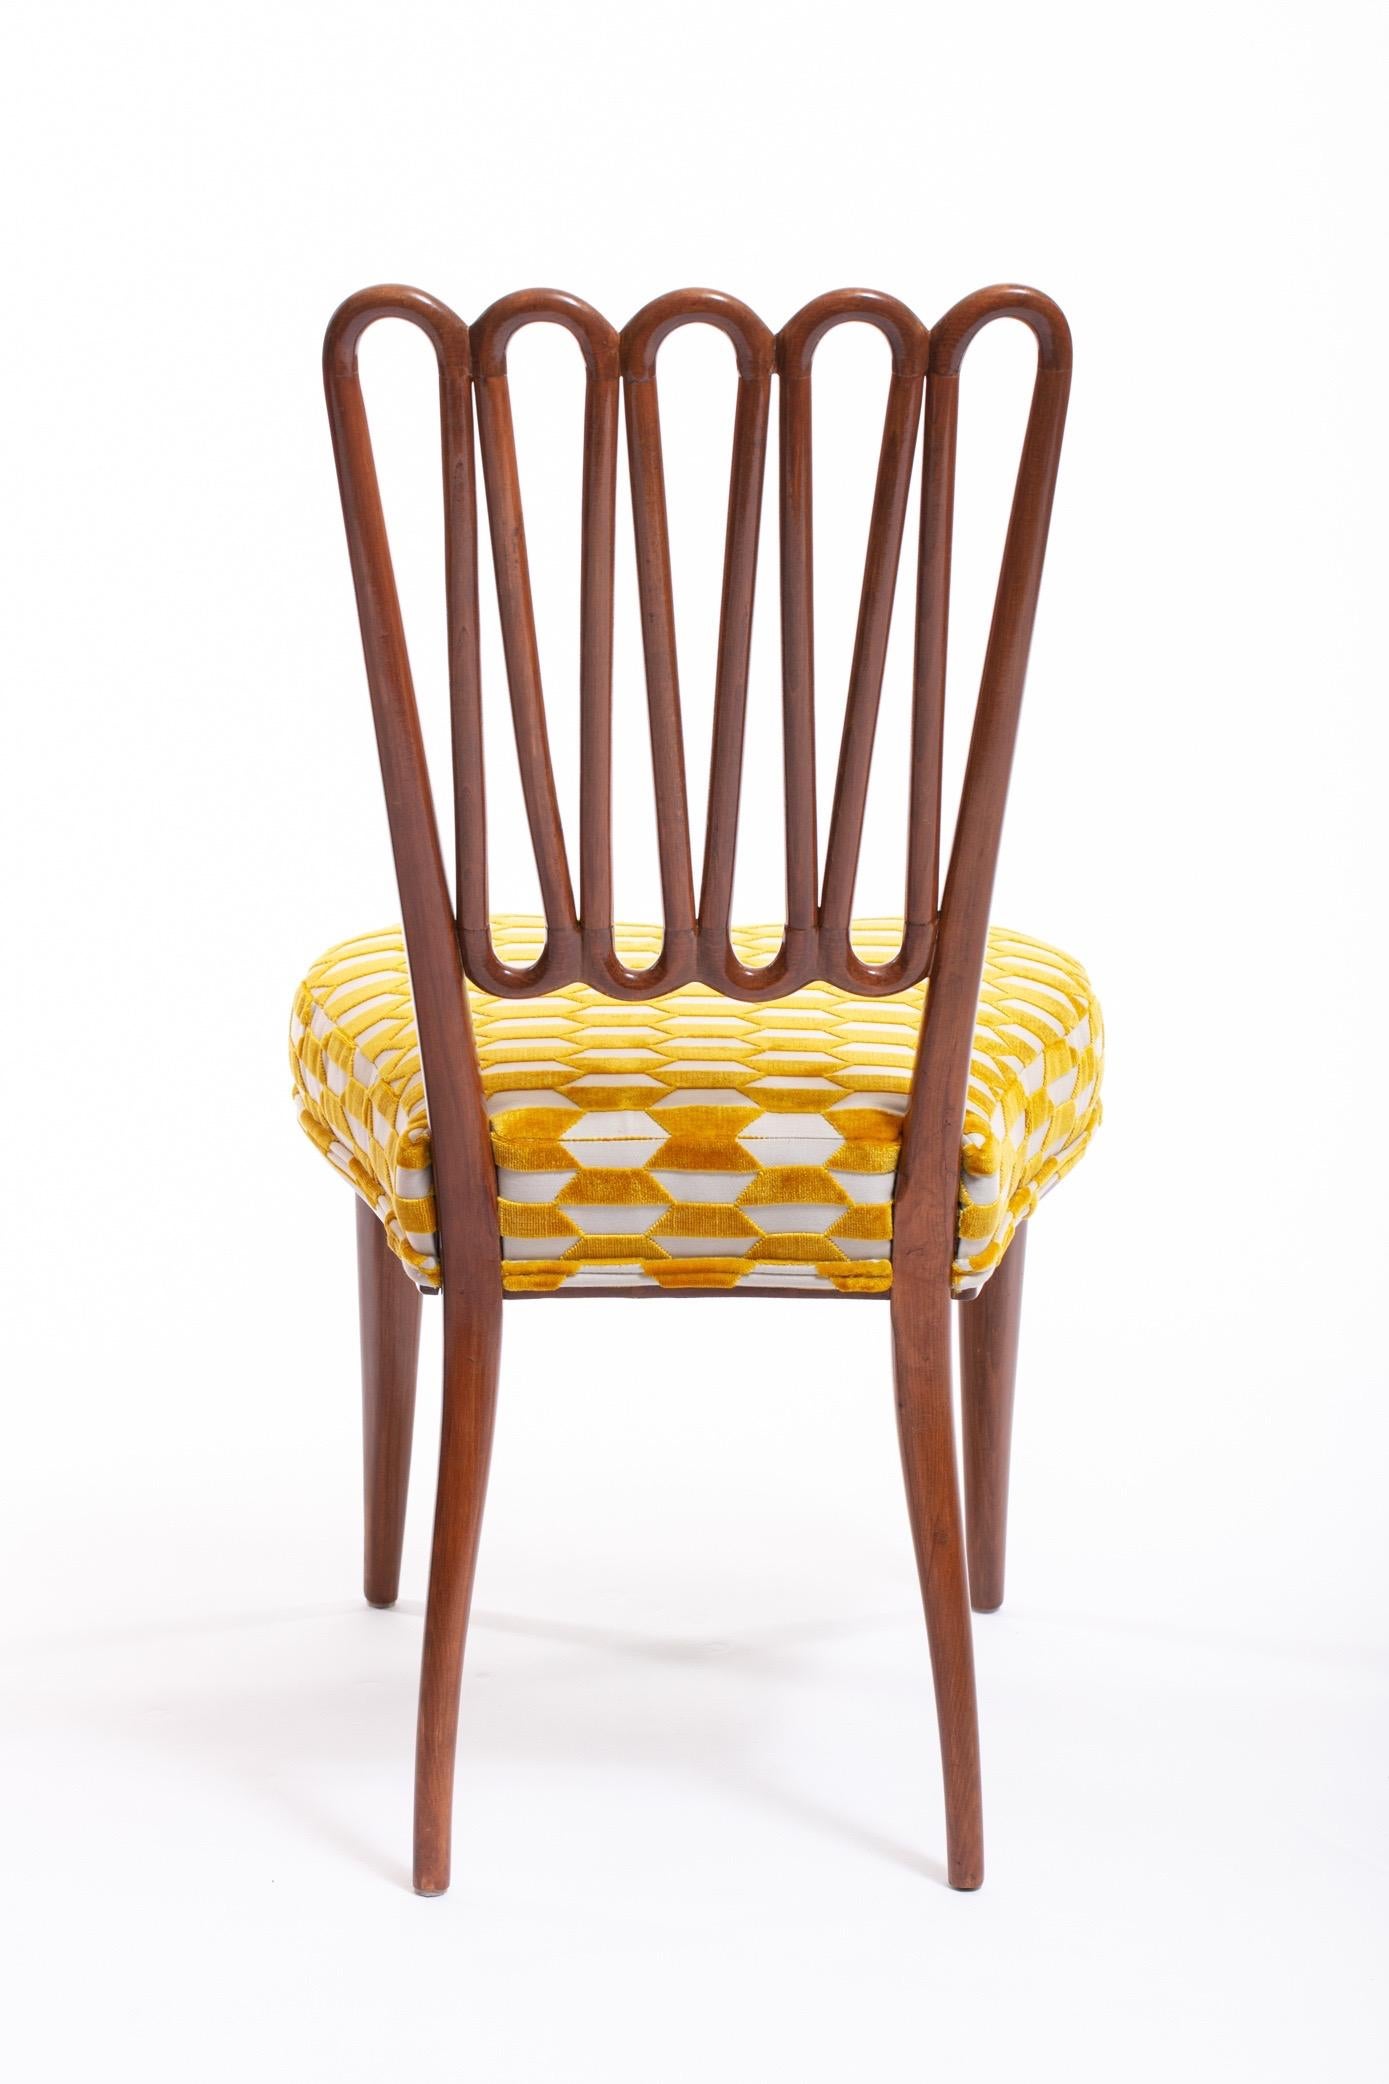 Italian midcentury side chair after Gio Ponti with gold yellow and ivory cut velvet, circa 1950s. So many details, where to begin. The bentwood craftsmanship is exquisite. The wooden legs and seat back are meticulous: gentle leg curves morph into